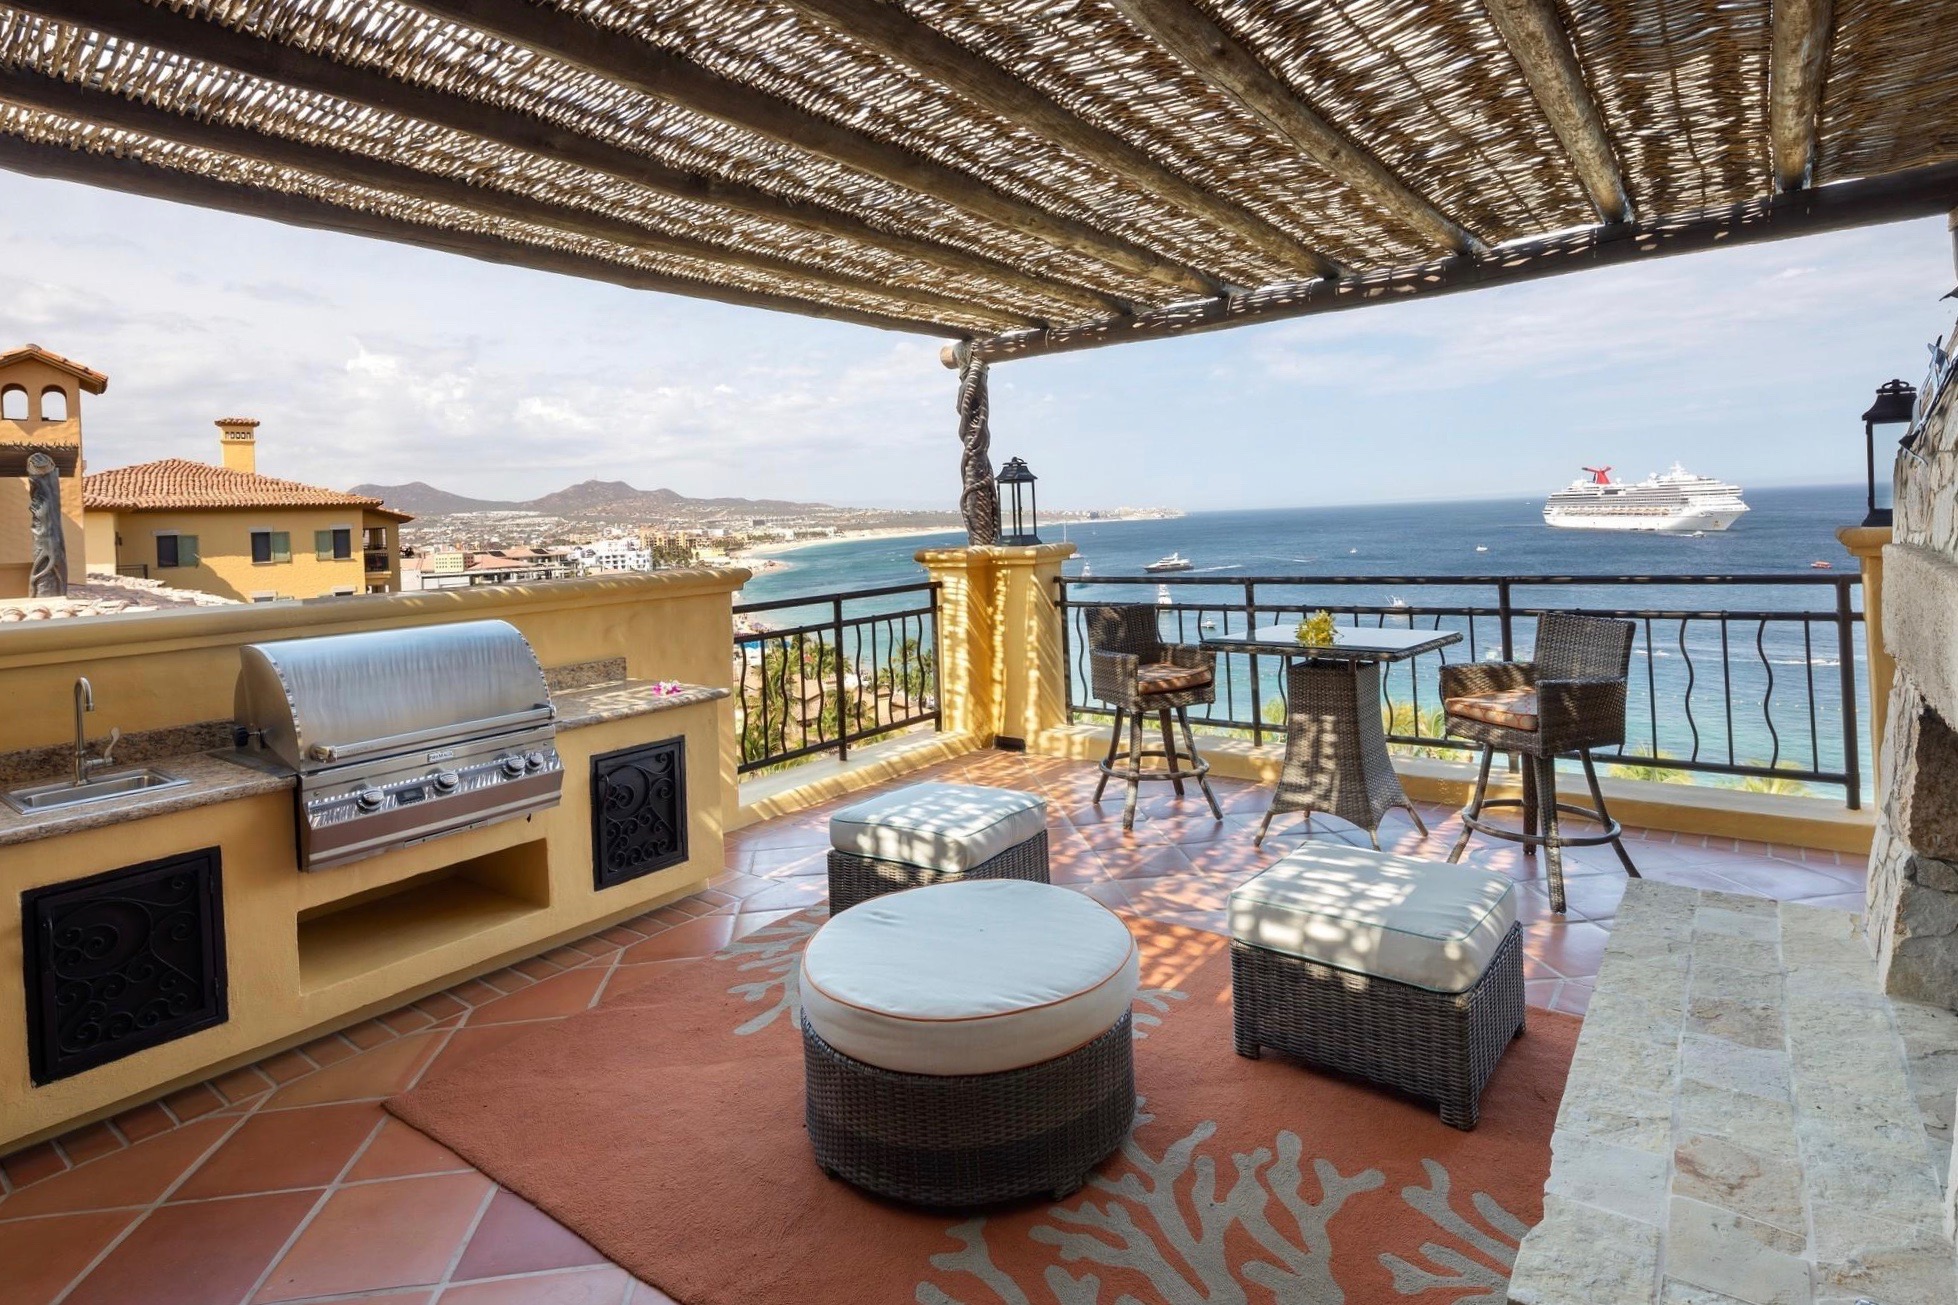 A balcony view from a Hacienda penthouse